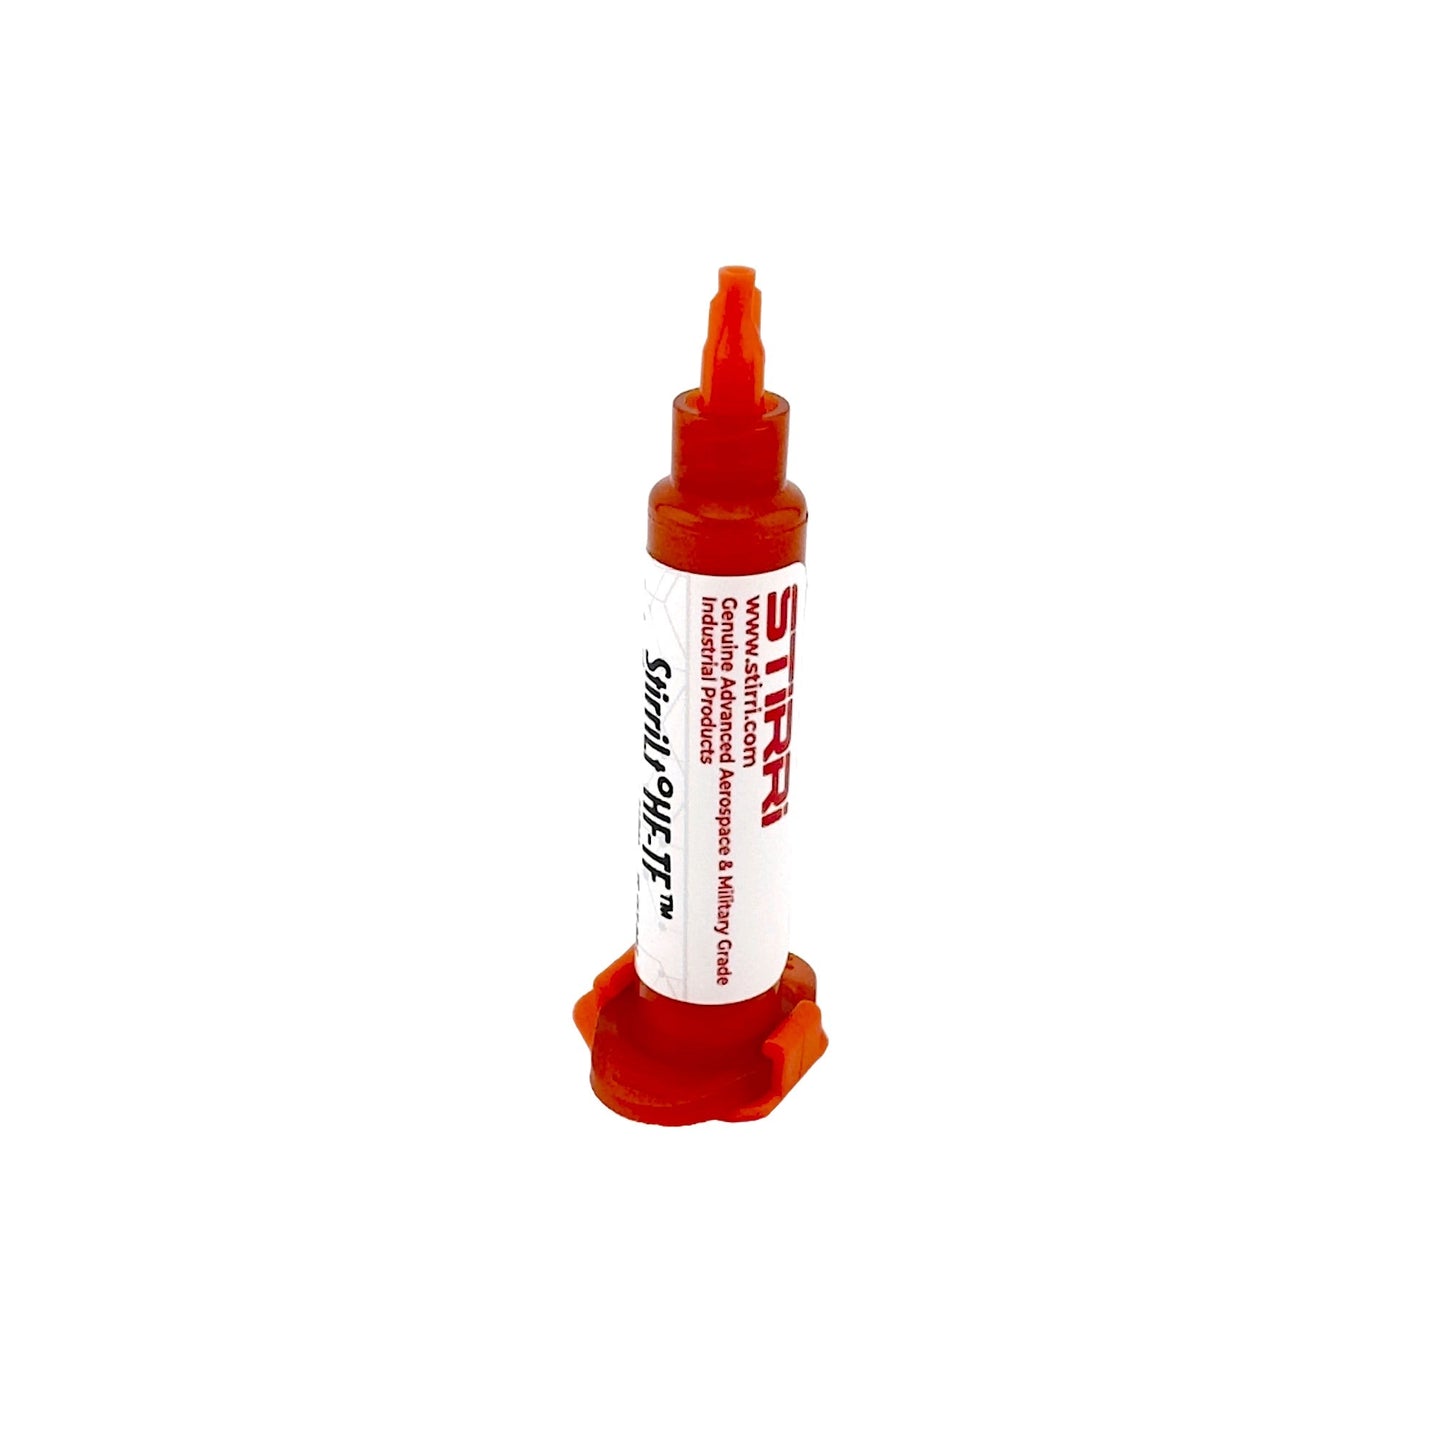 LT-HF-TF specialty no-clean halogen-free low-temp soldering tacky paste flux for low-temp alloys (ROL0)